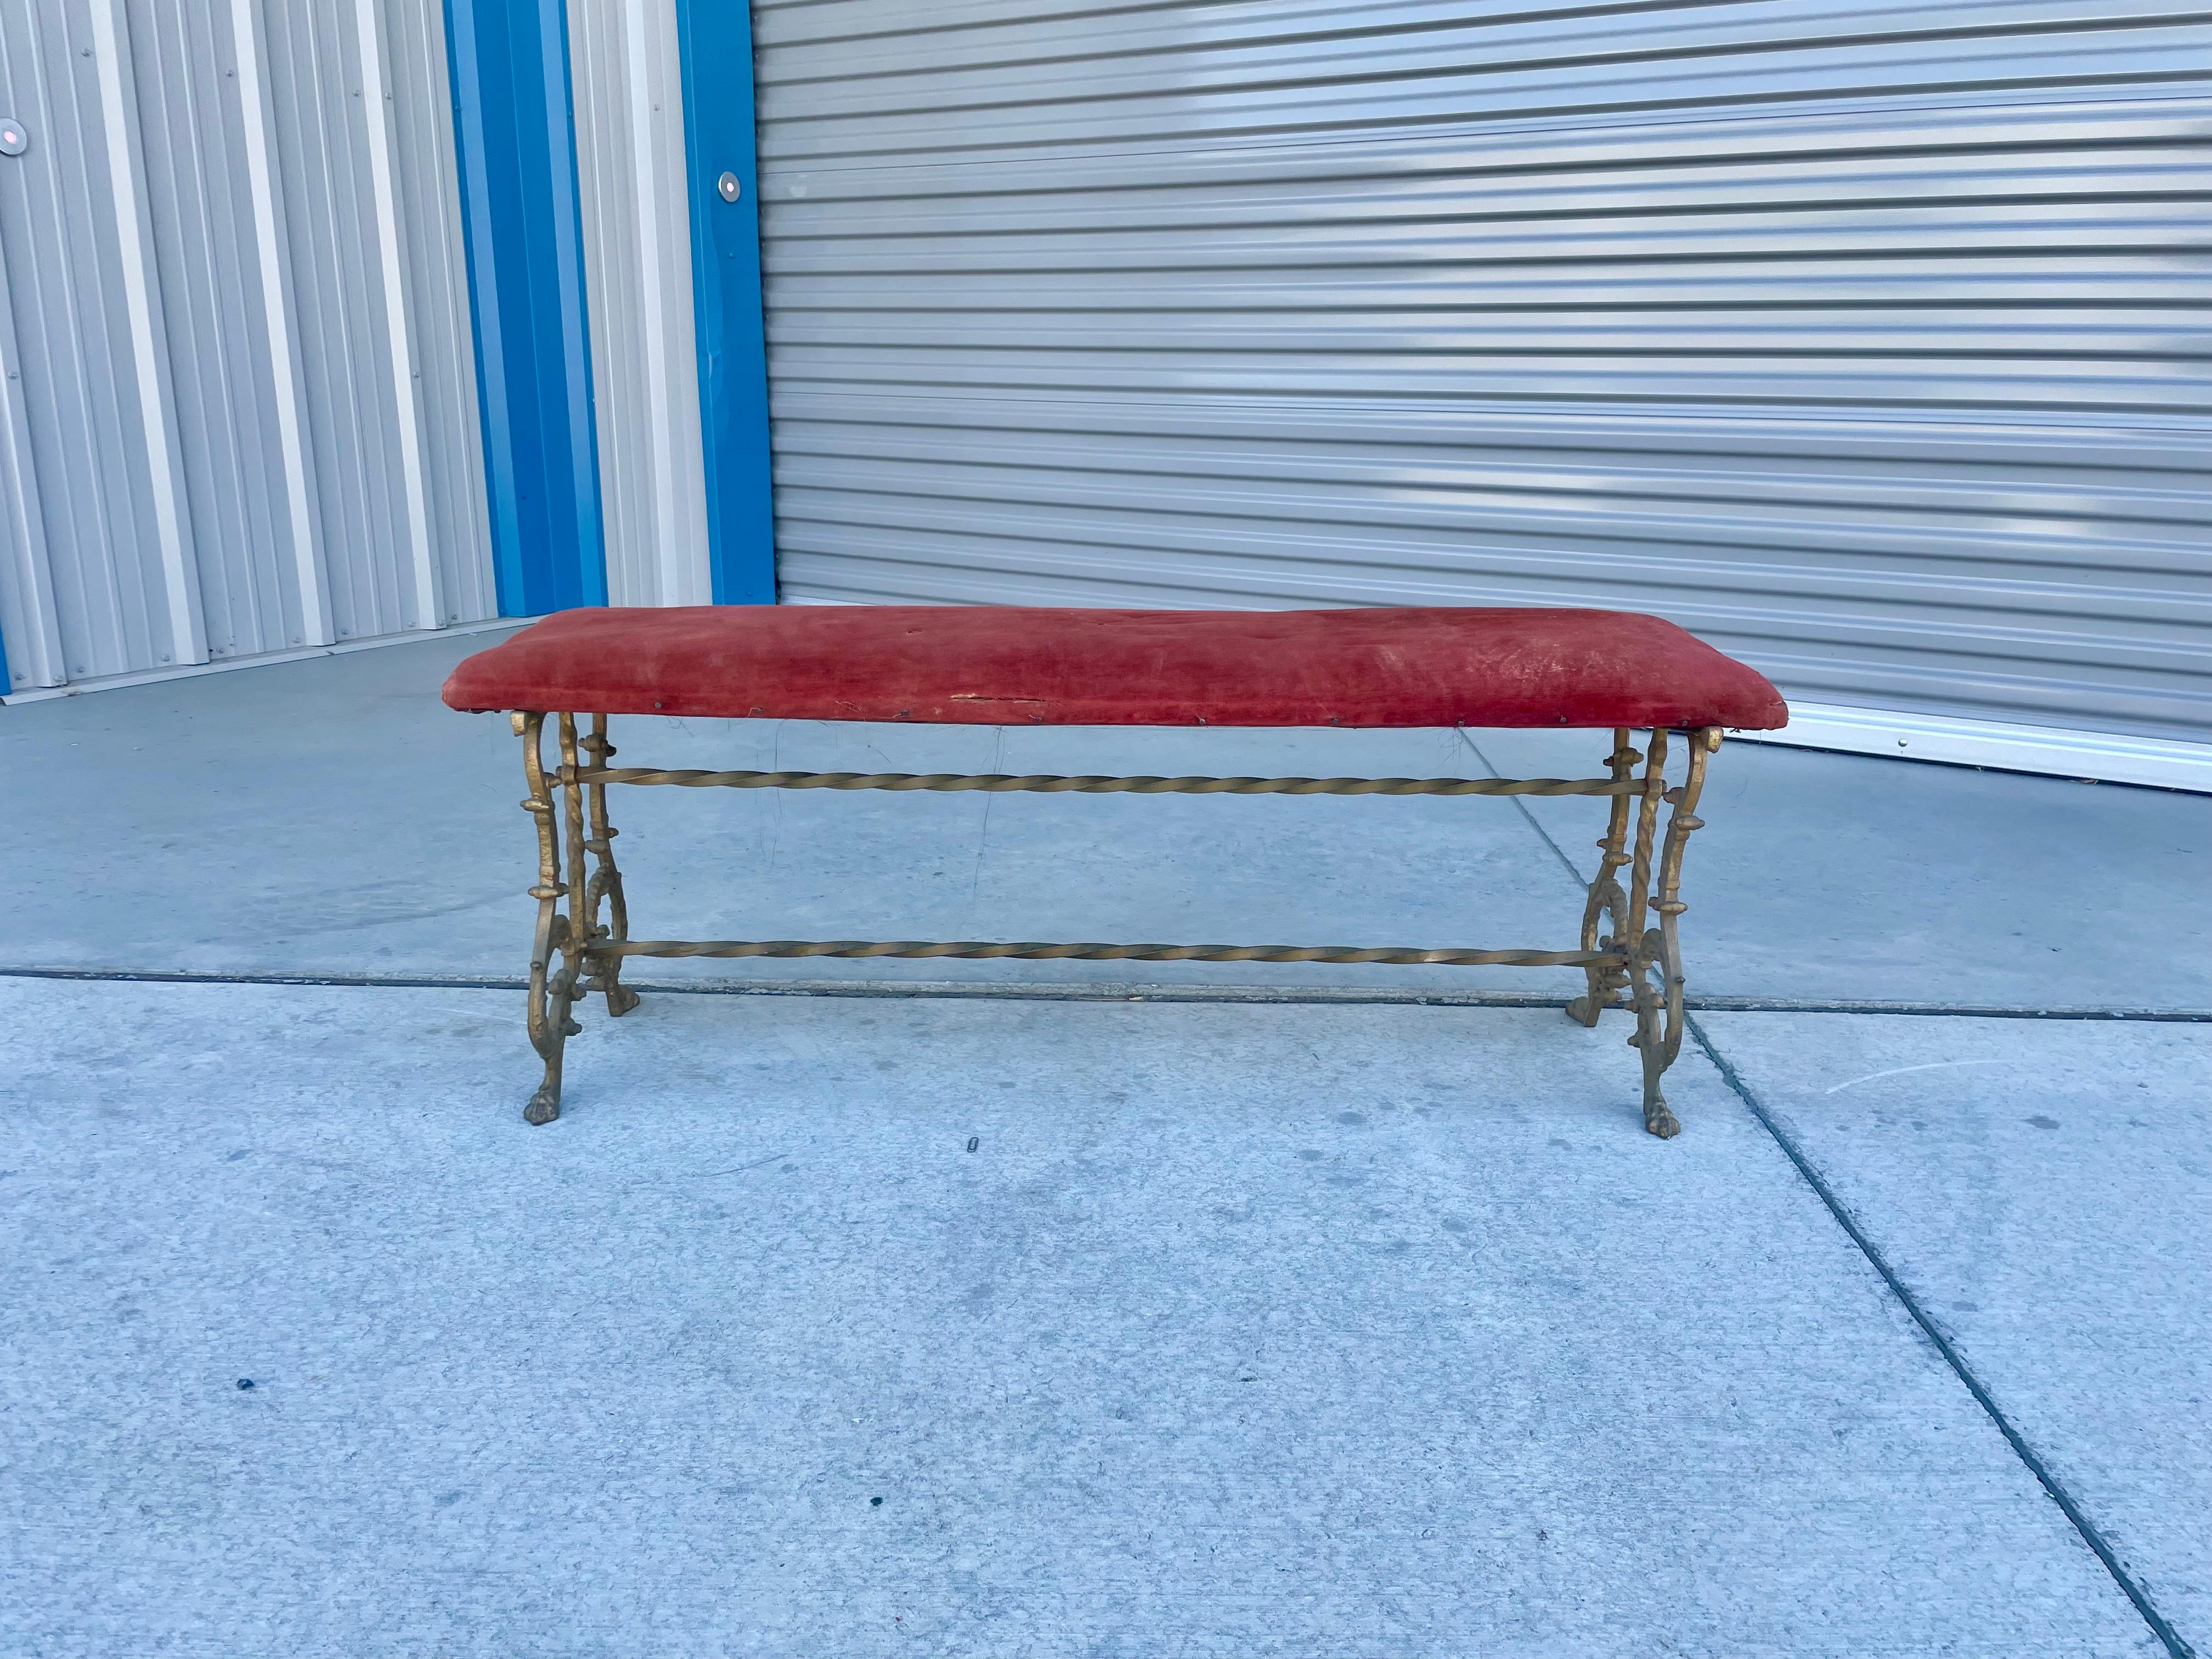 Vintage brass & velvet bench designed and manufactured in the United States circa 1950s. This stunning bench features a red velvet upholstery that sits on a brass base that adds a touch of sophistication and elegance.